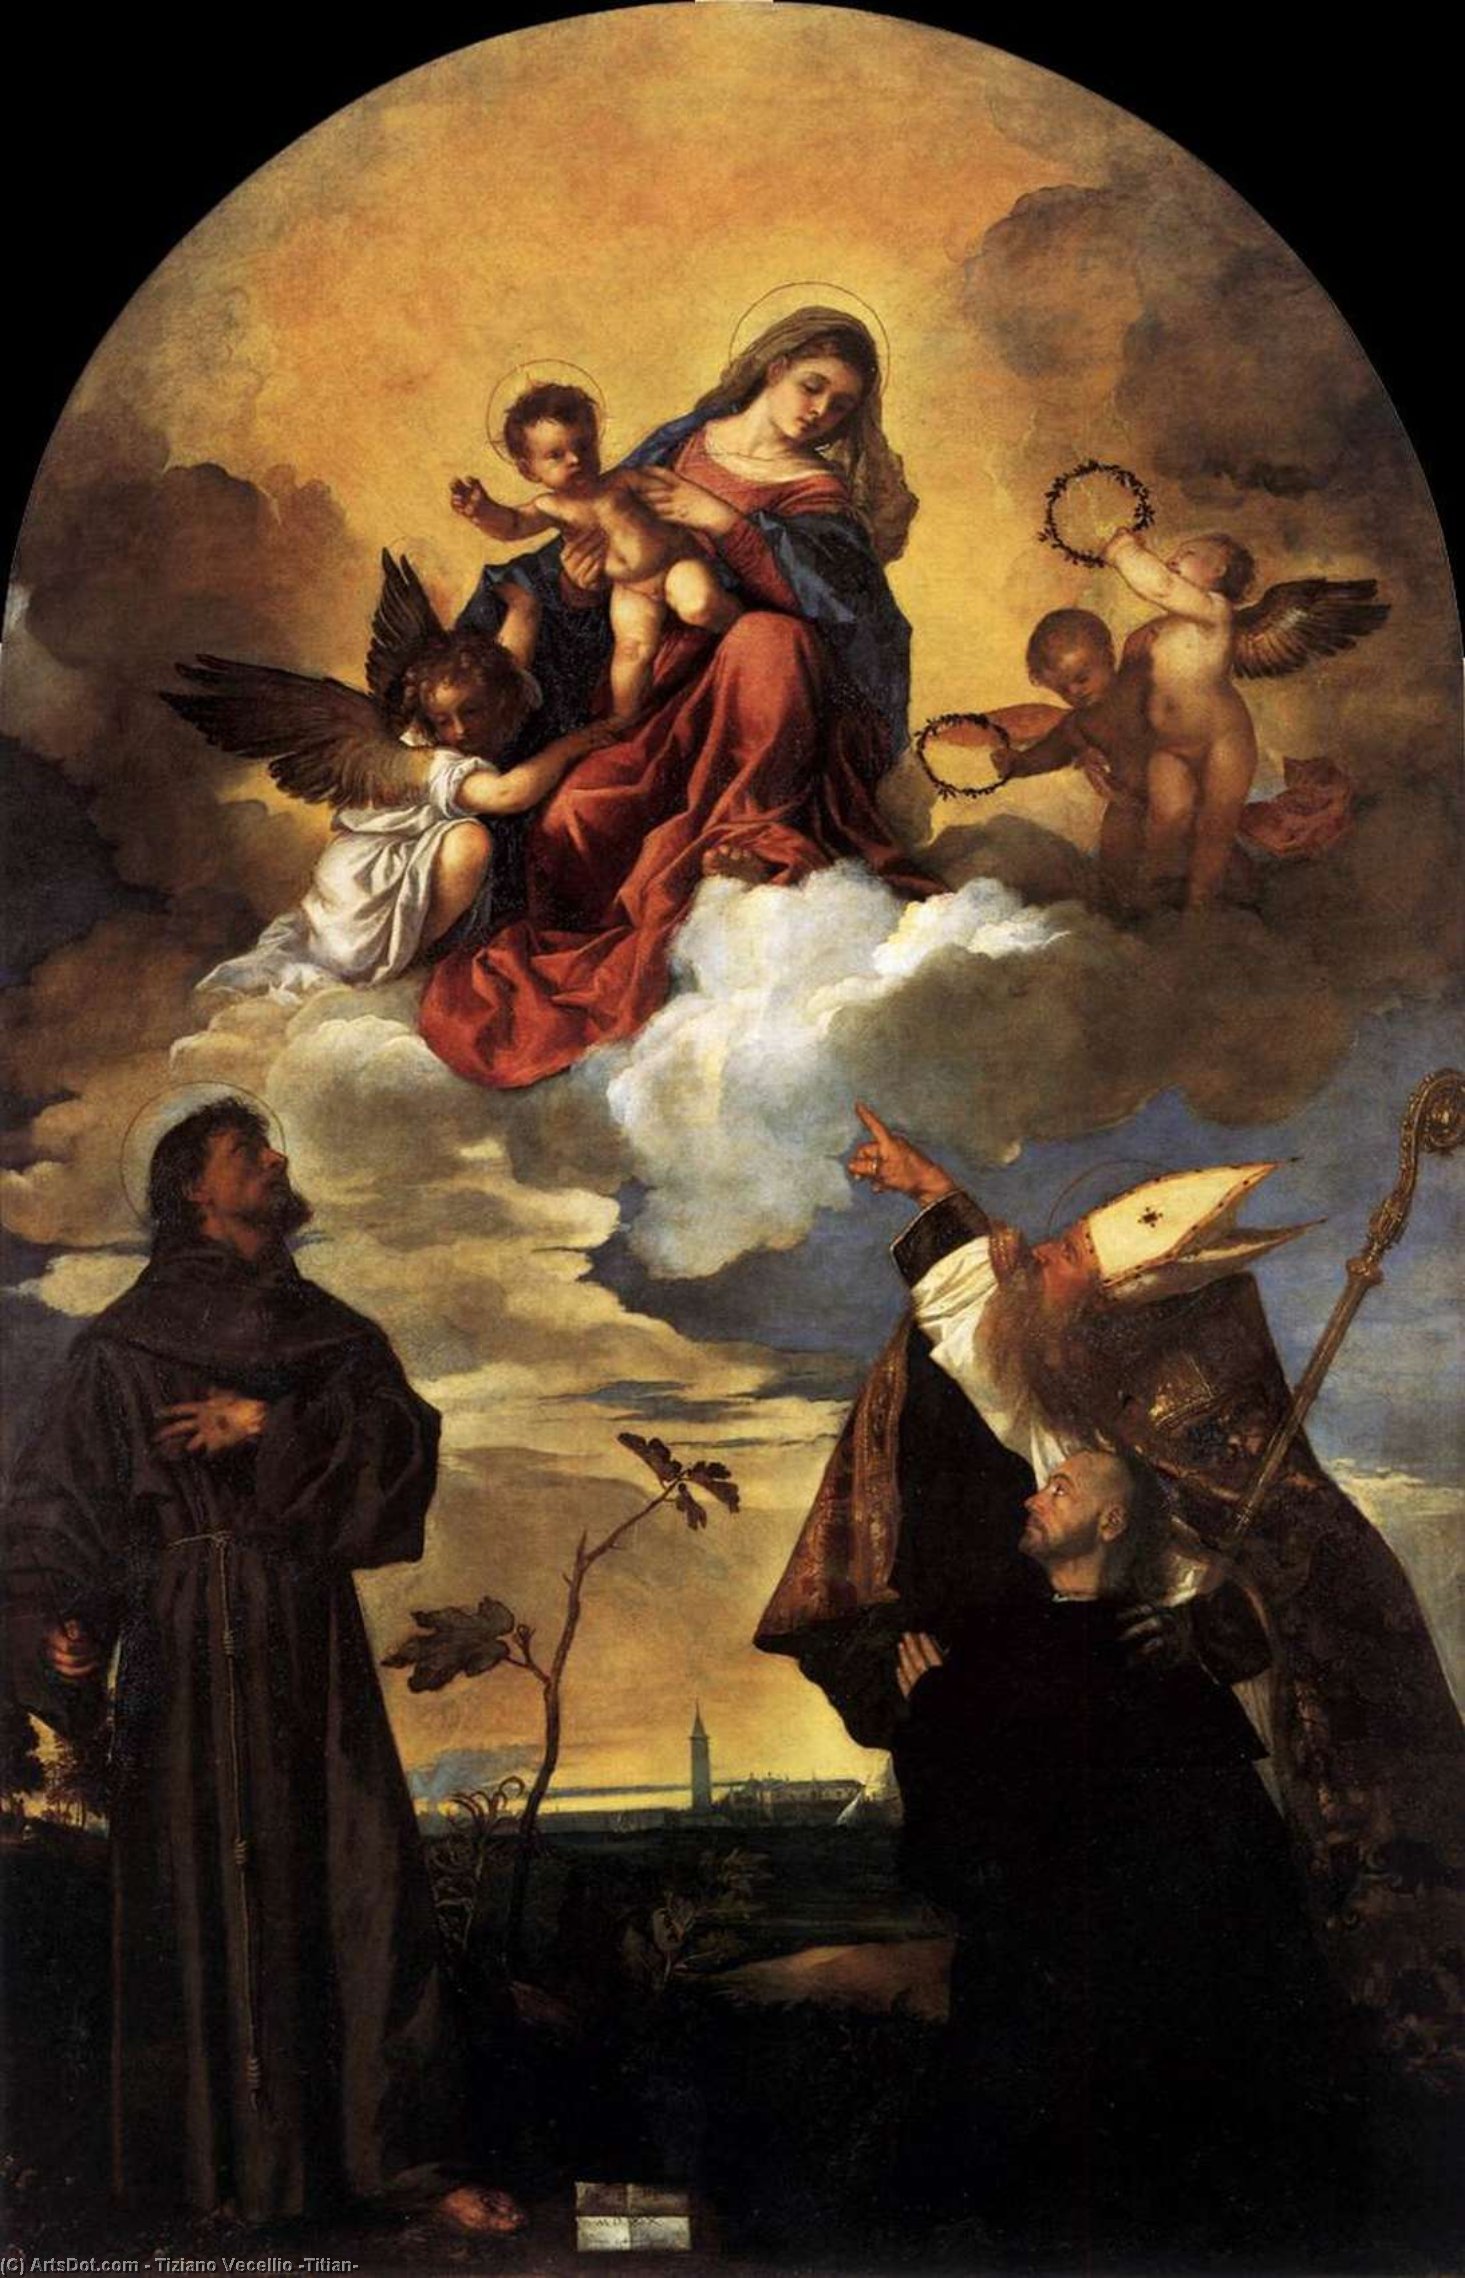 WikiOO.org - دایره المعارف هنرهای زیبا - نقاشی، آثار هنری Tiziano Vecellio (Titian) - Madonna in Glory with the Christ Child and Sts Francis and Alvise with the Donor